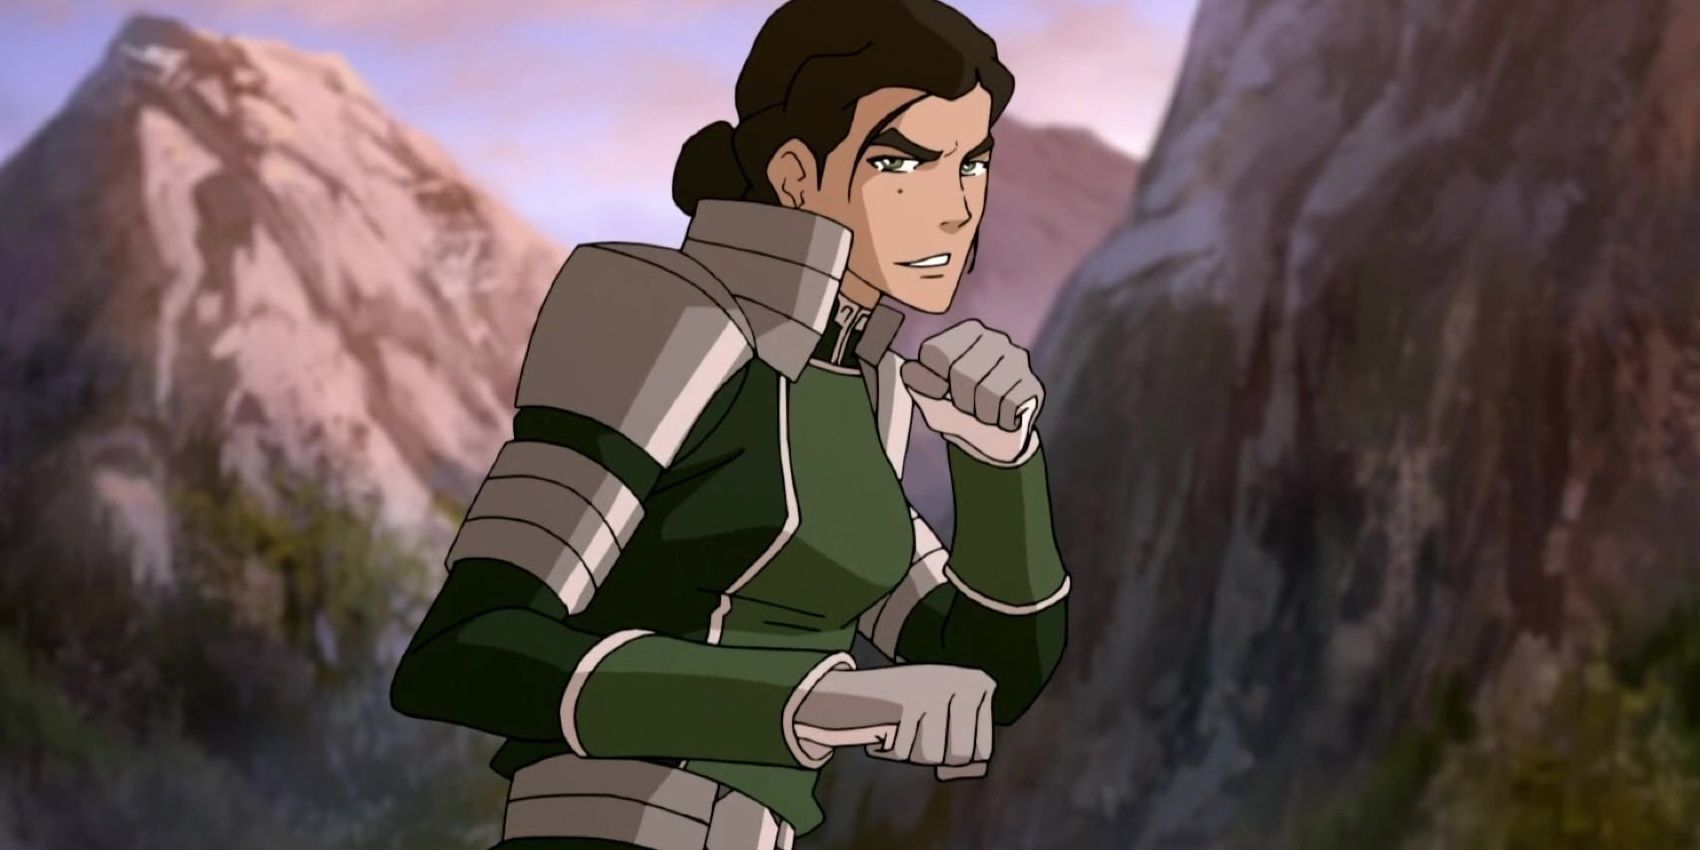 Legend of Korra 8 Reasons Why Zaheer Is The Best Villain (& 7 Why Its Kuvira)